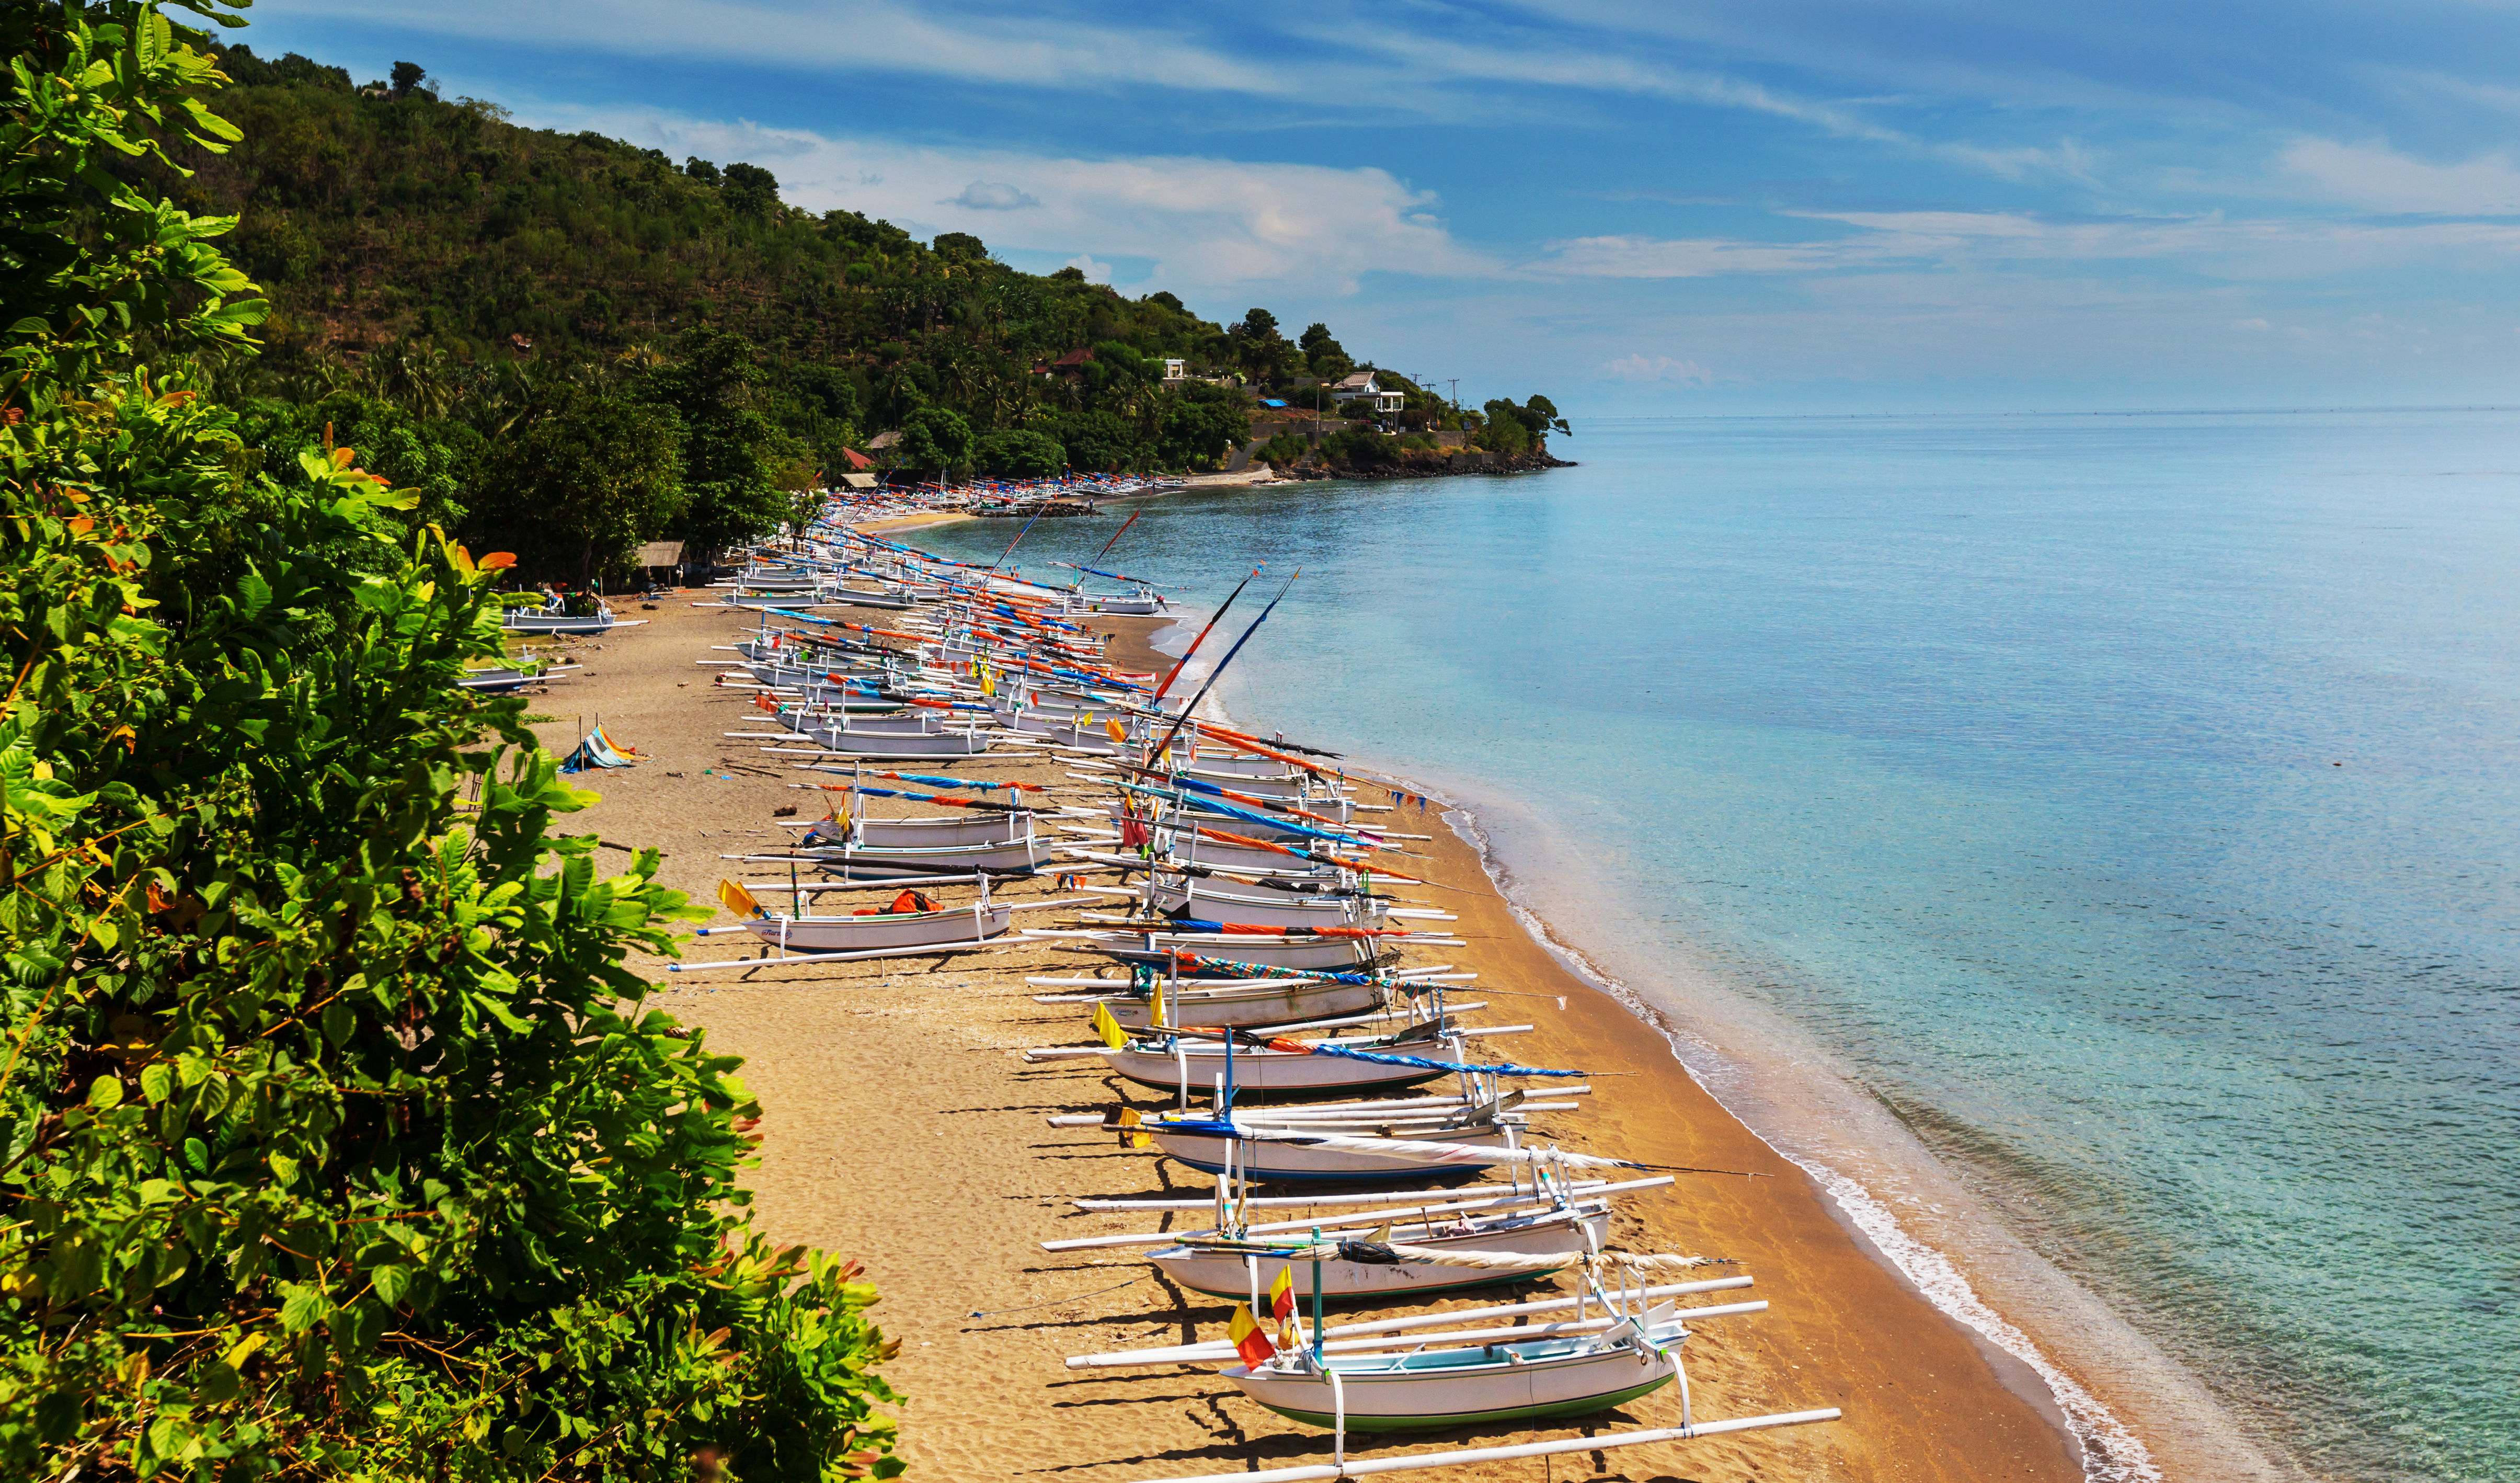 Traditional Indonesian wooden boats lined up on a golden sand beach at Amed, Bali.